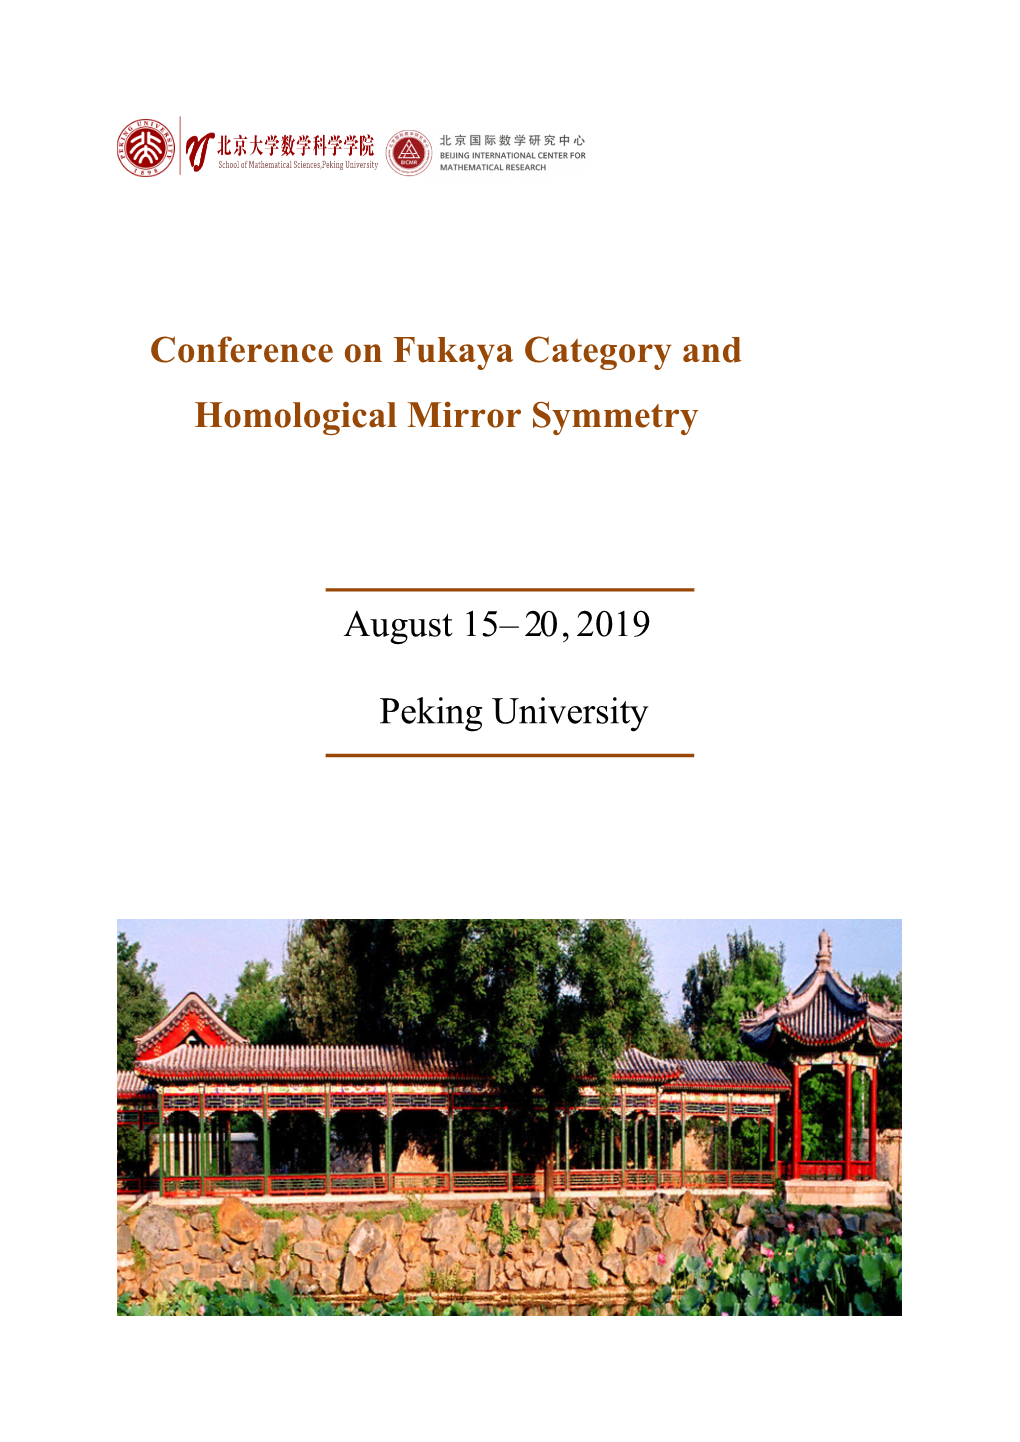 Conference on Fukaya Category and Homological Mirror Symmetry